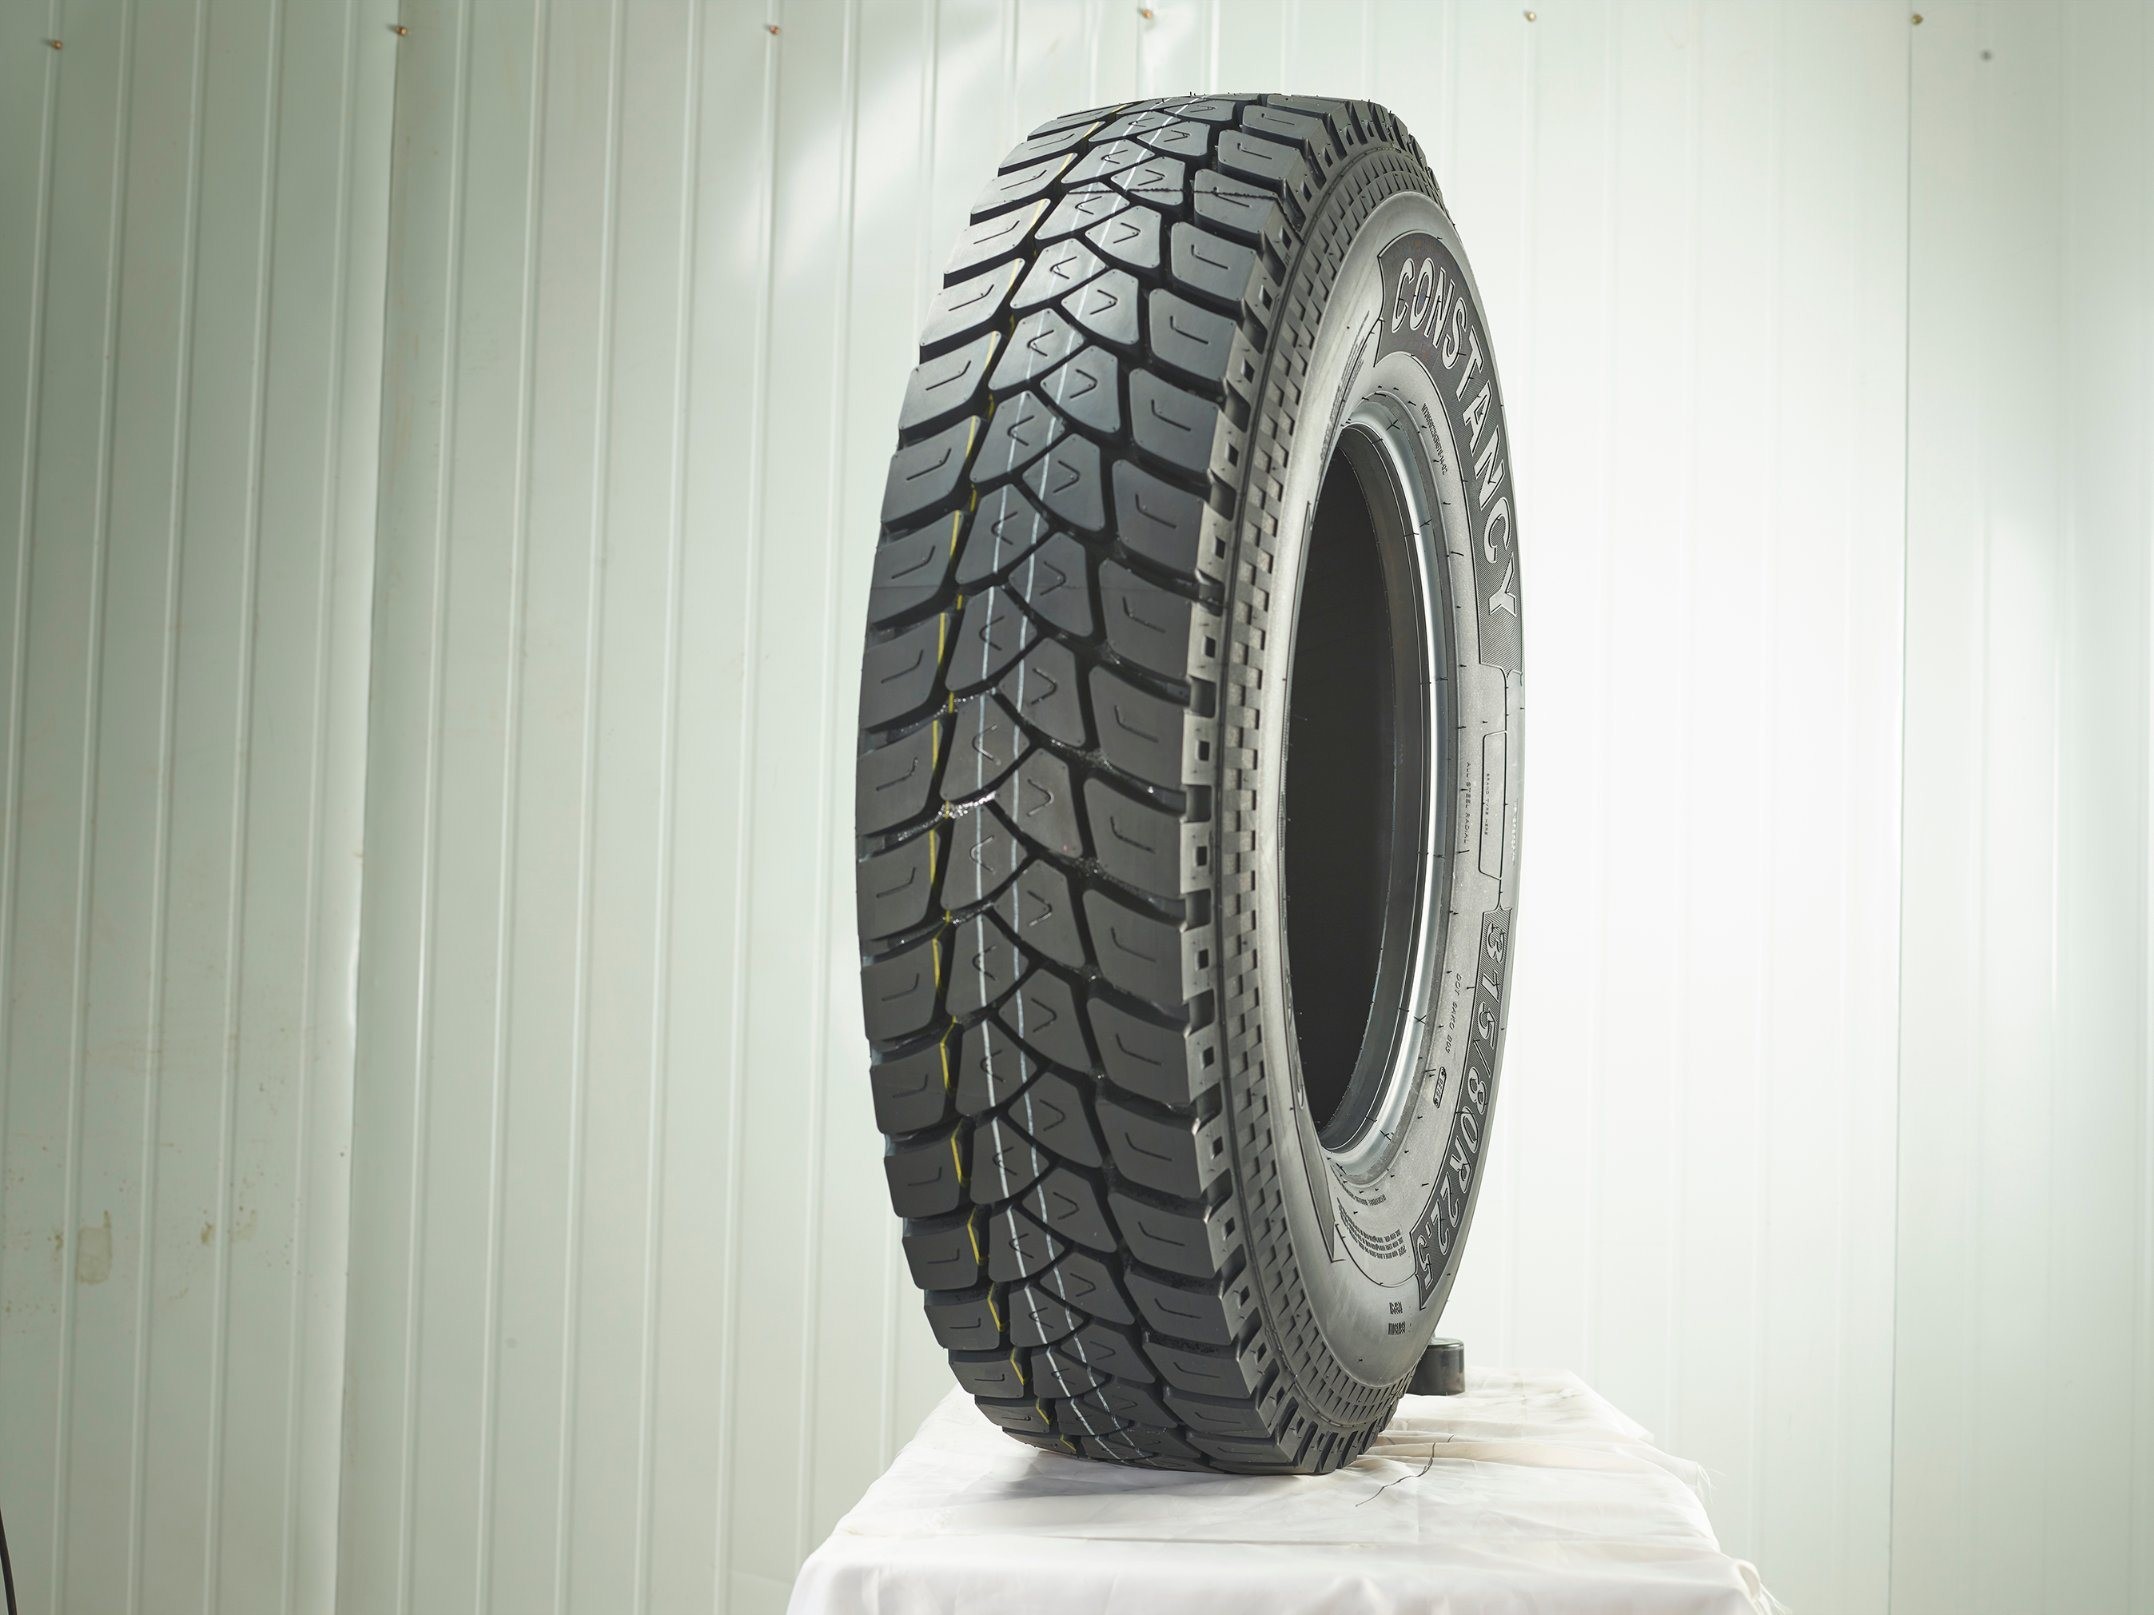                  Constancy TBR Tyre, Truck Tires with All Steel Radial (315/80R22.5)              for sale